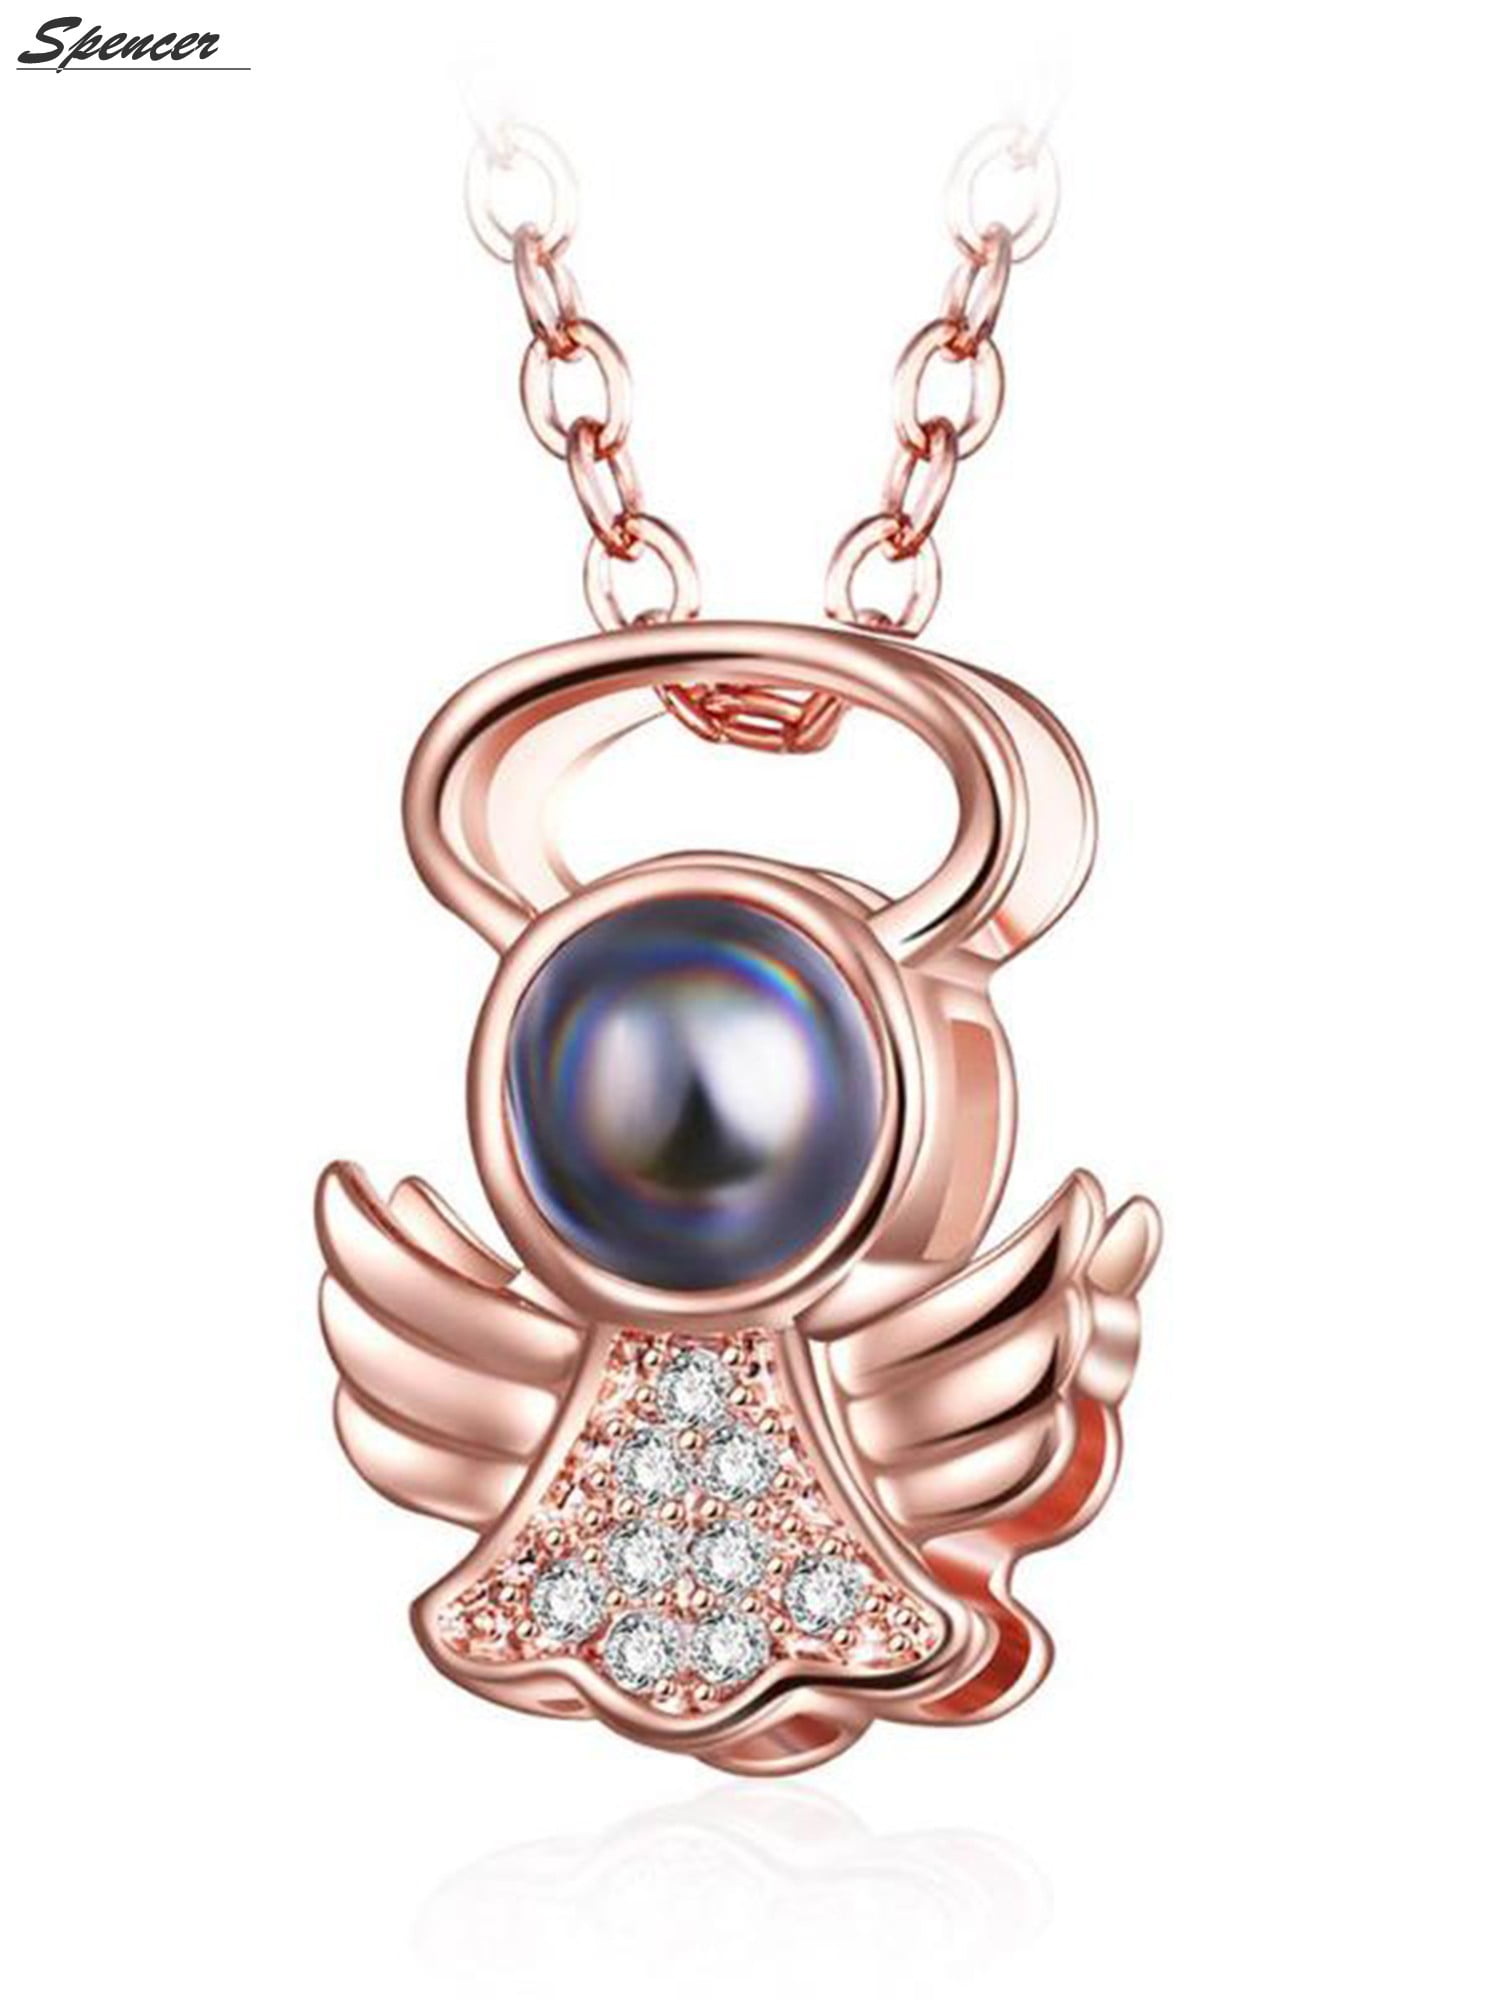 Jewelry Angel Wings Crystal Rose Gold Necklace Vintage Circle Friends Gifts 